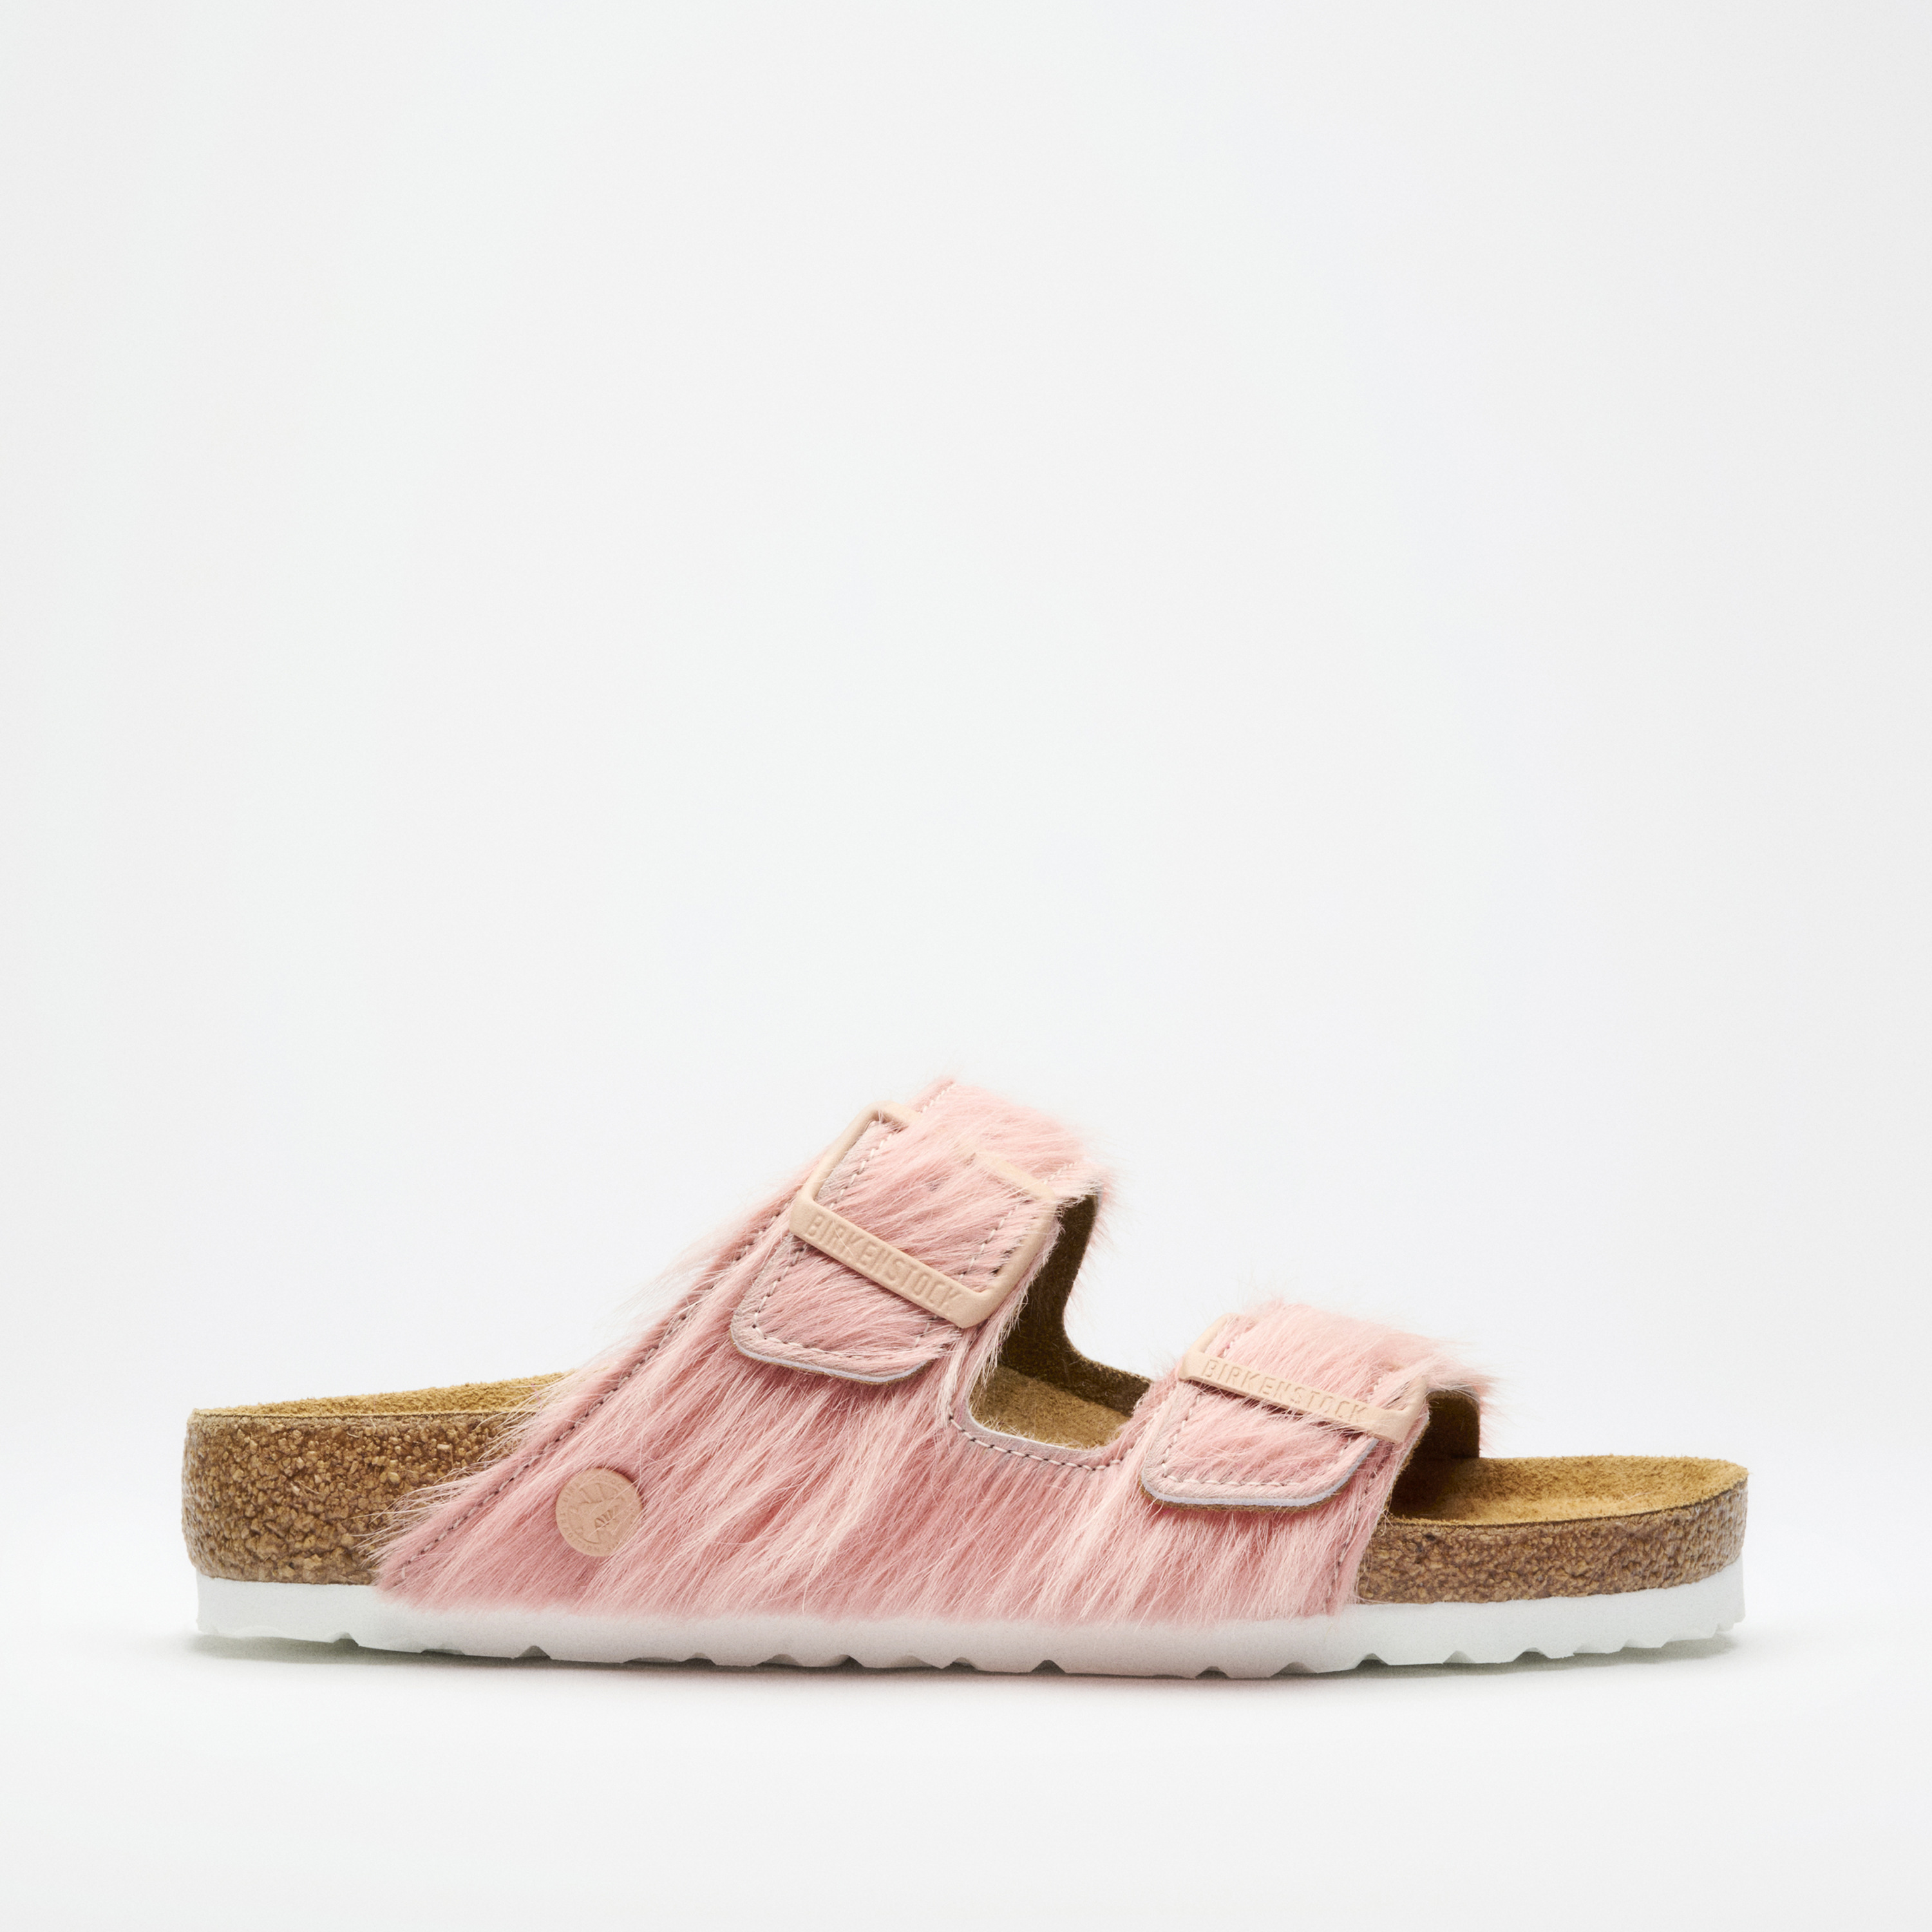 EXCLUSIVE: Birkenstock & Concepts Made a Very Hairy Arizona